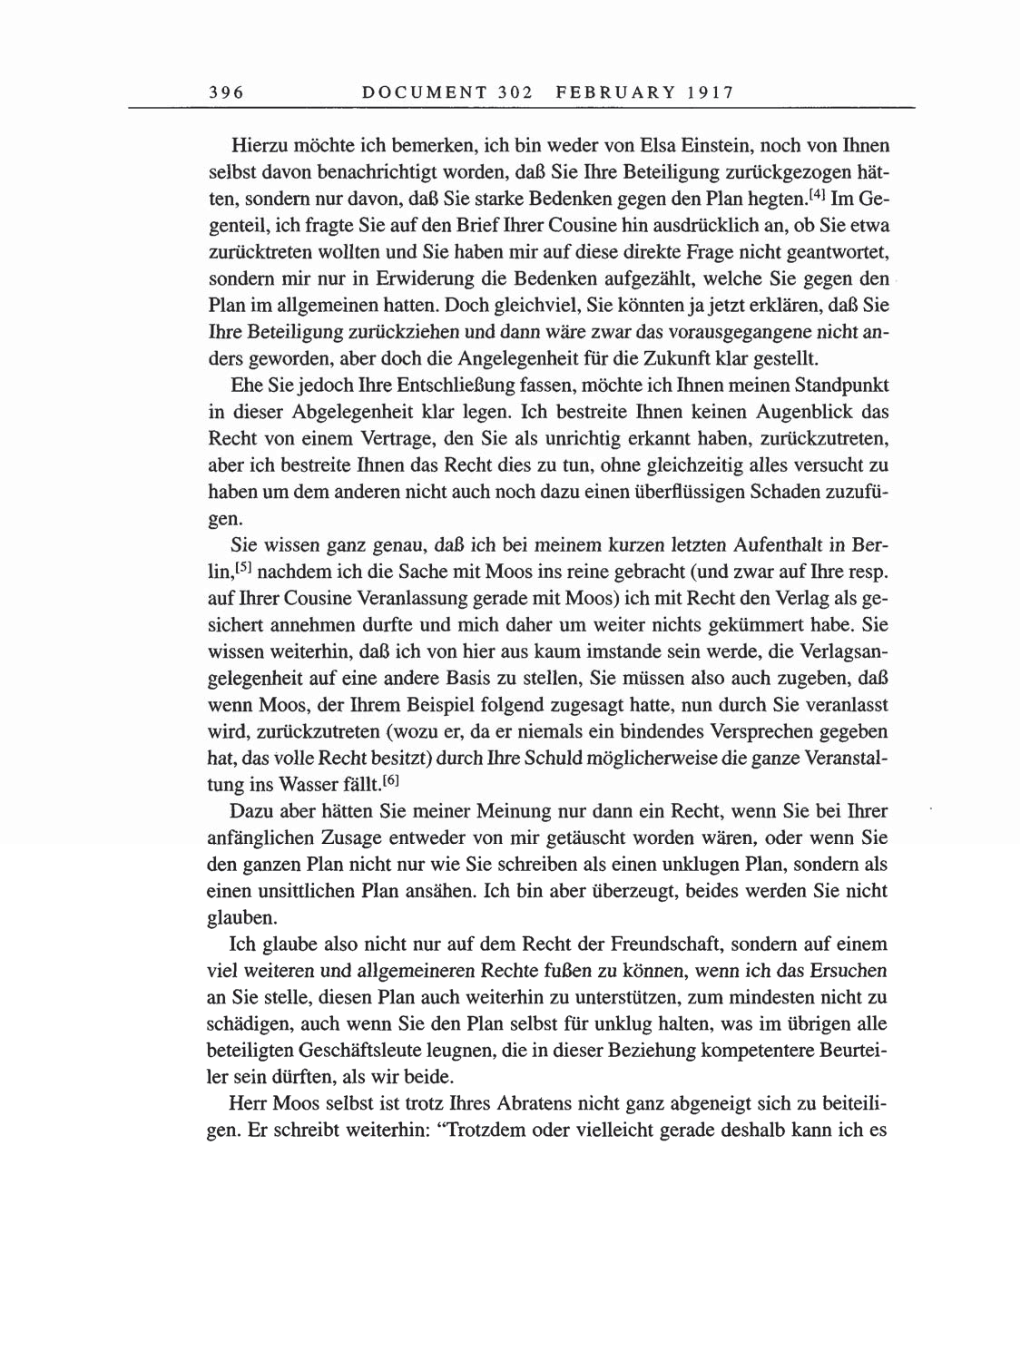 Volume 8, Part A: The Berlin Years: Correspondence 1914-1917 page 396